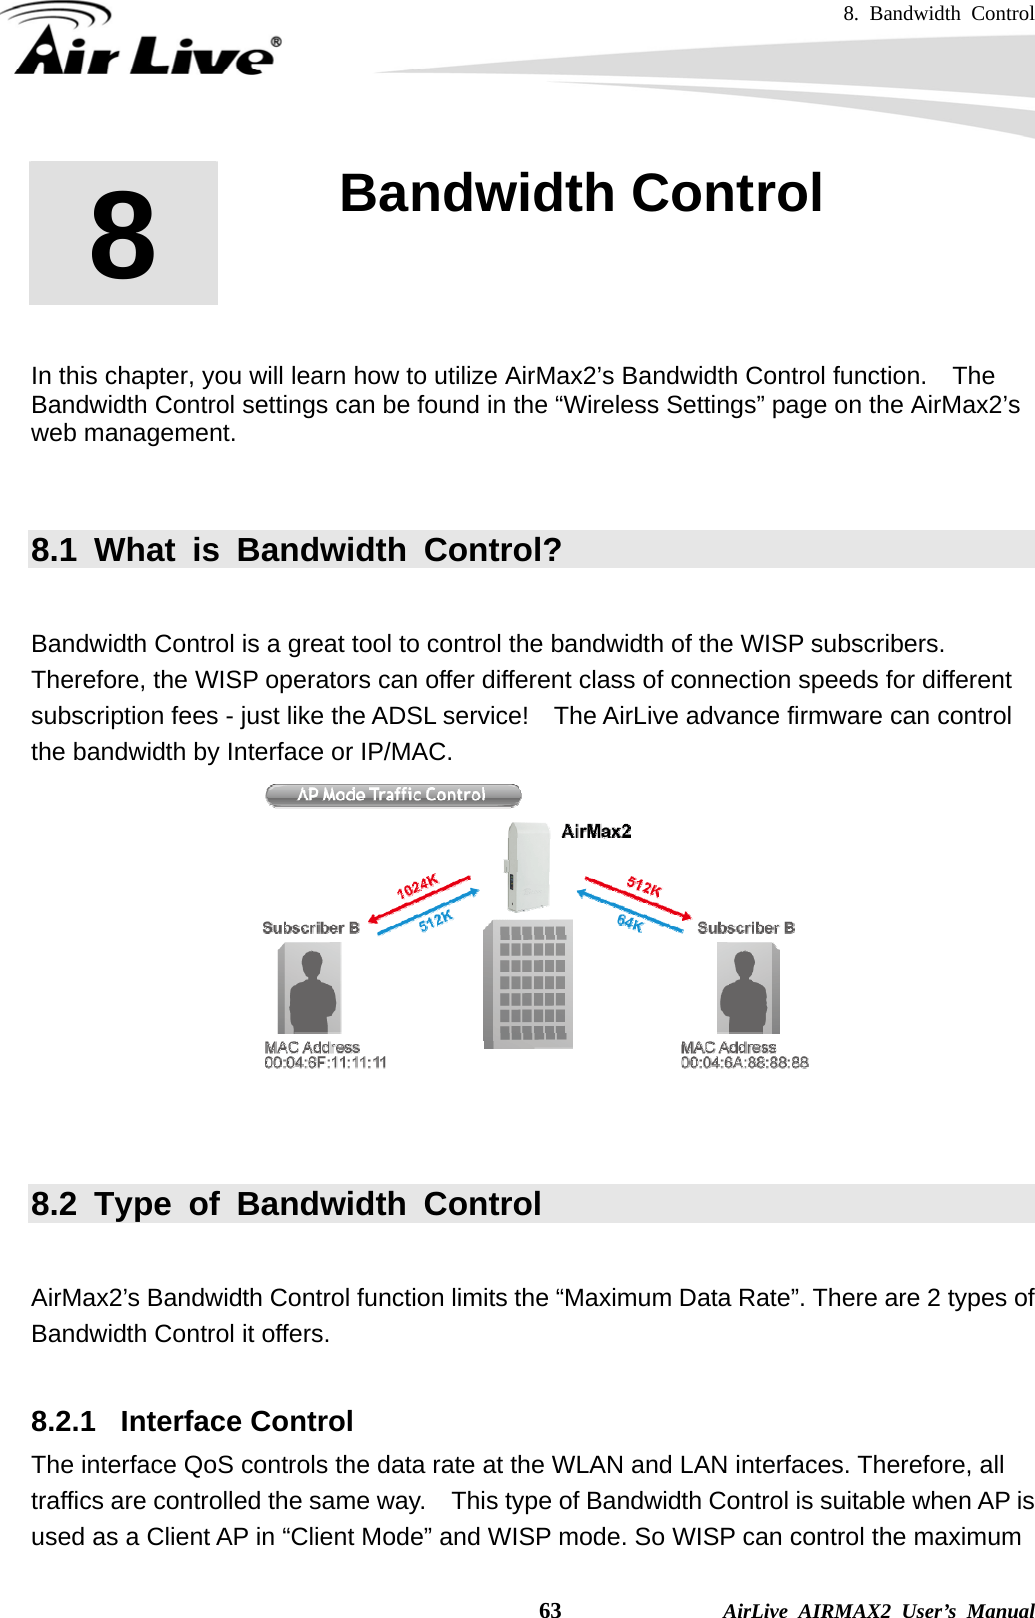 8. Bandwidth Control    63              AirLive AIRMAX2 User’s Manual        In this chapter, you will learn how to utilize AirMax2’s Bandwidth Control function.    The Bandwidth Control settings can be found in the “Wireless Settings” page on the AirMax2’s web management.     8.1 What is Bandwidth Control?  Bandwidth Control is a great tool to control the bandwidth of the WISP subscribers. Therefore, the WISP operators can offer different class of connection speeds for different subscription fees - just like the ADSL service!    The AirLive advance firmware can control the bandwidth by Interface or IP/MAC.    8.2 Type of Bandwidth Control  AirMax2’s Bandwidth Control function limits the “Maximum Data Rate”. There are 2 types of Bandwidth Control it offers.  8.2.1  Interface Control The interface QoS controls the data rate at the WLAN and LAN interfaces. Therefore, all traffics are controlled the same way.    This type of Bandwidth Control is suitable when AP is used as a Client AP in “Client Mode” and WISP mode. So WISP can control the maximum 8  8. Bandwidth Control    